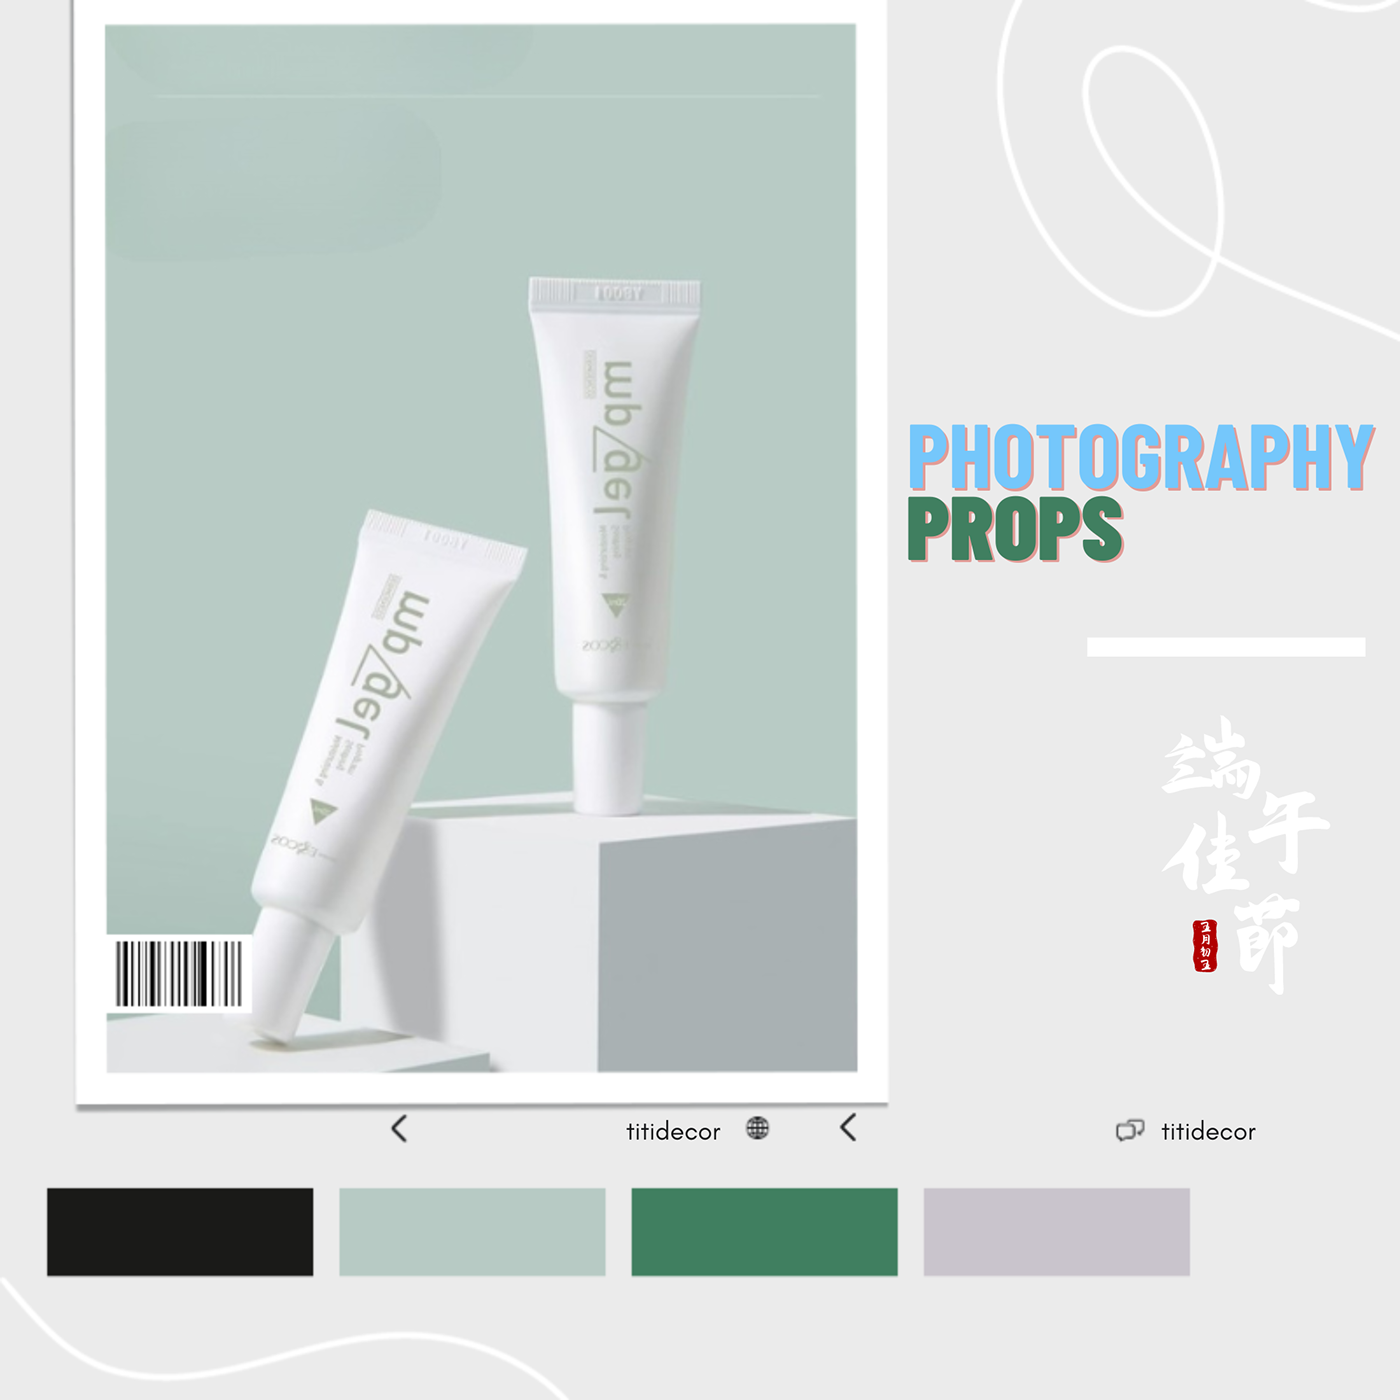 skincare props props design propsphotography